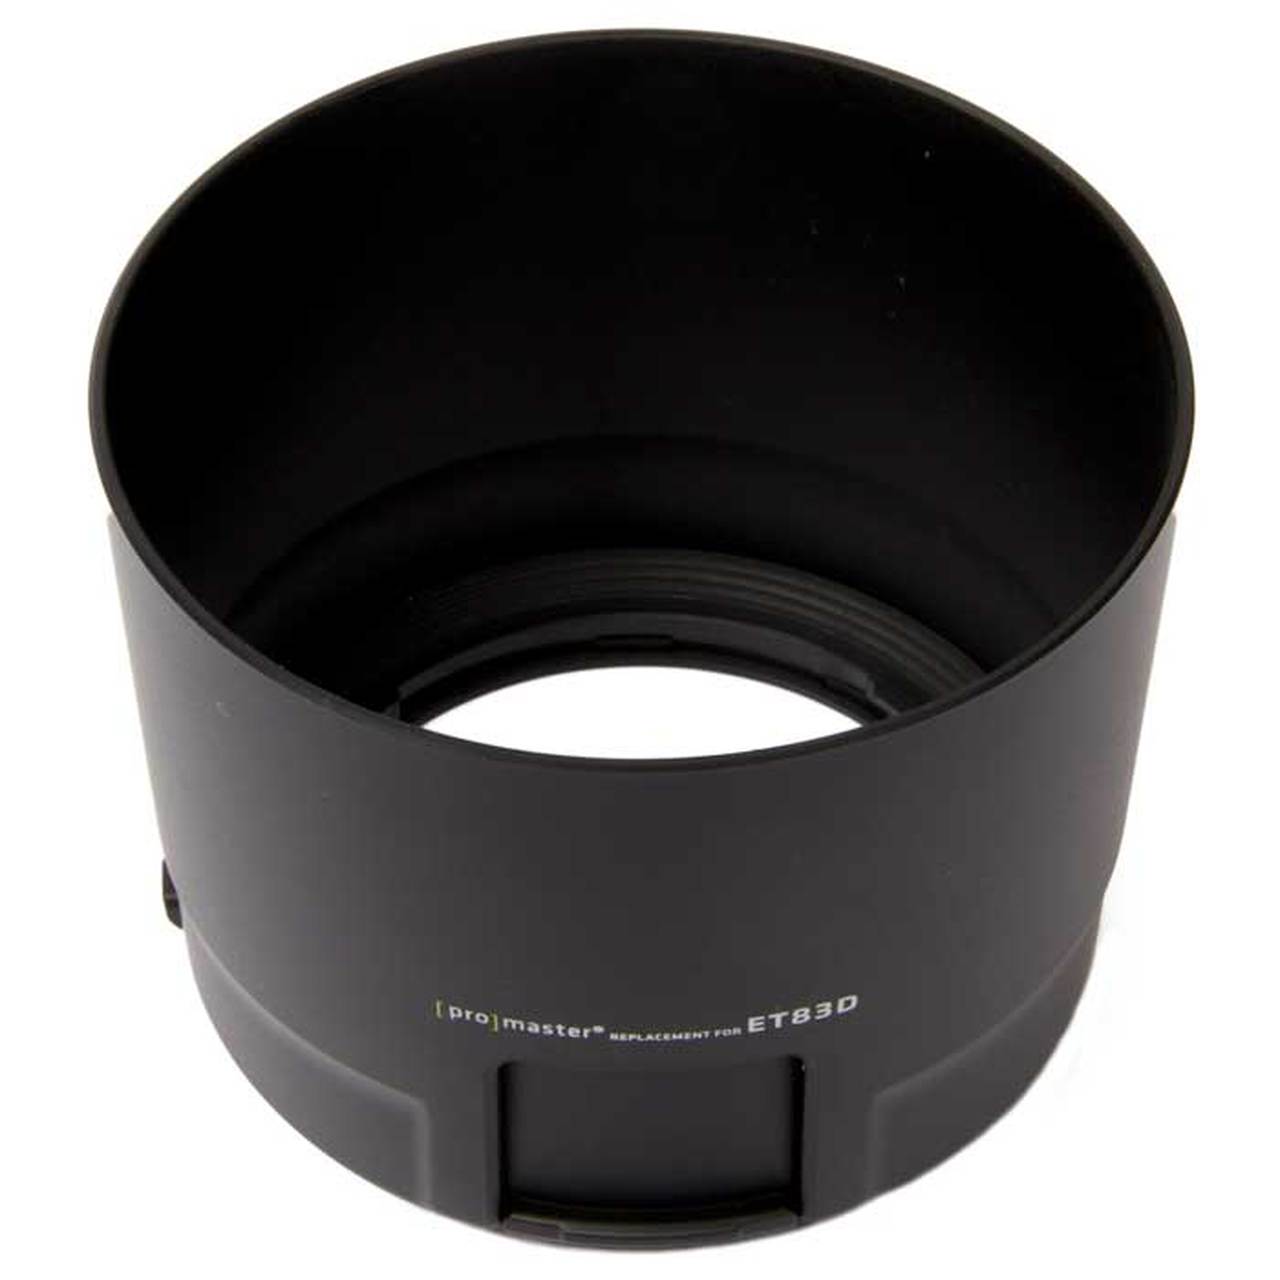 Promaster 4933 ET-83D Hood for Canon